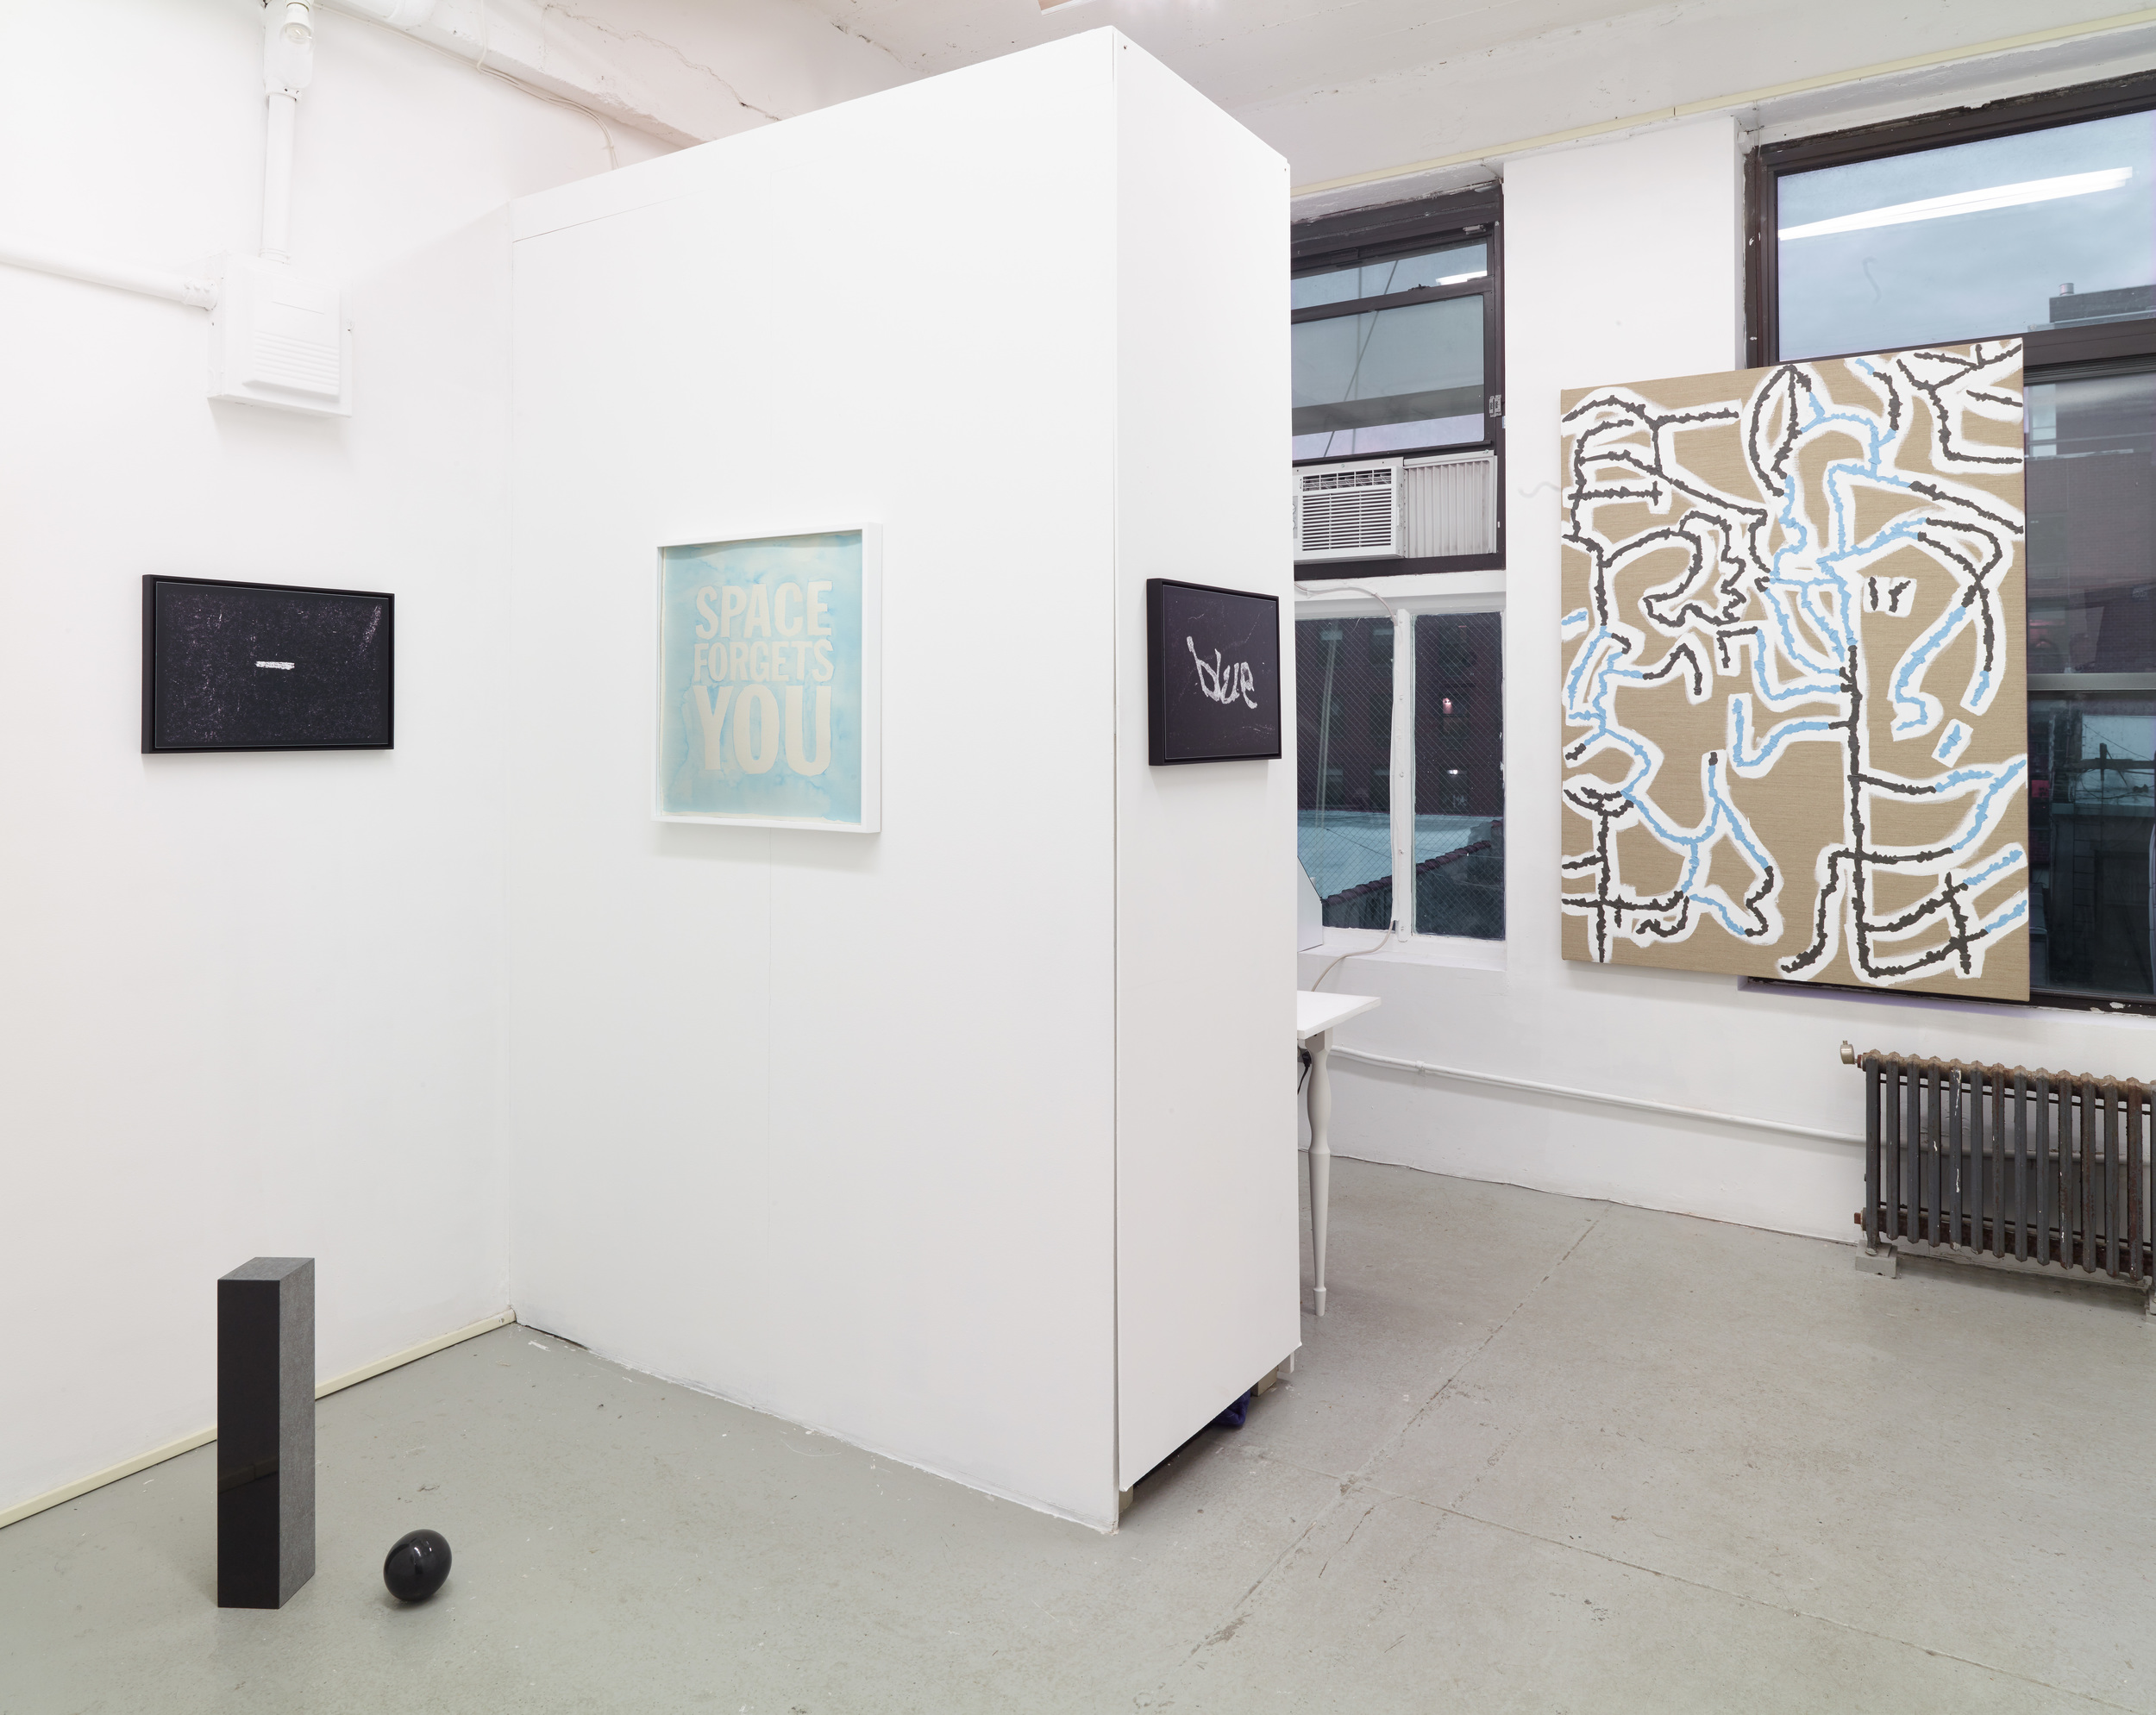 Installation view of 'Two Different Ways to Do Two Different Things' curated by Susanna Callegari